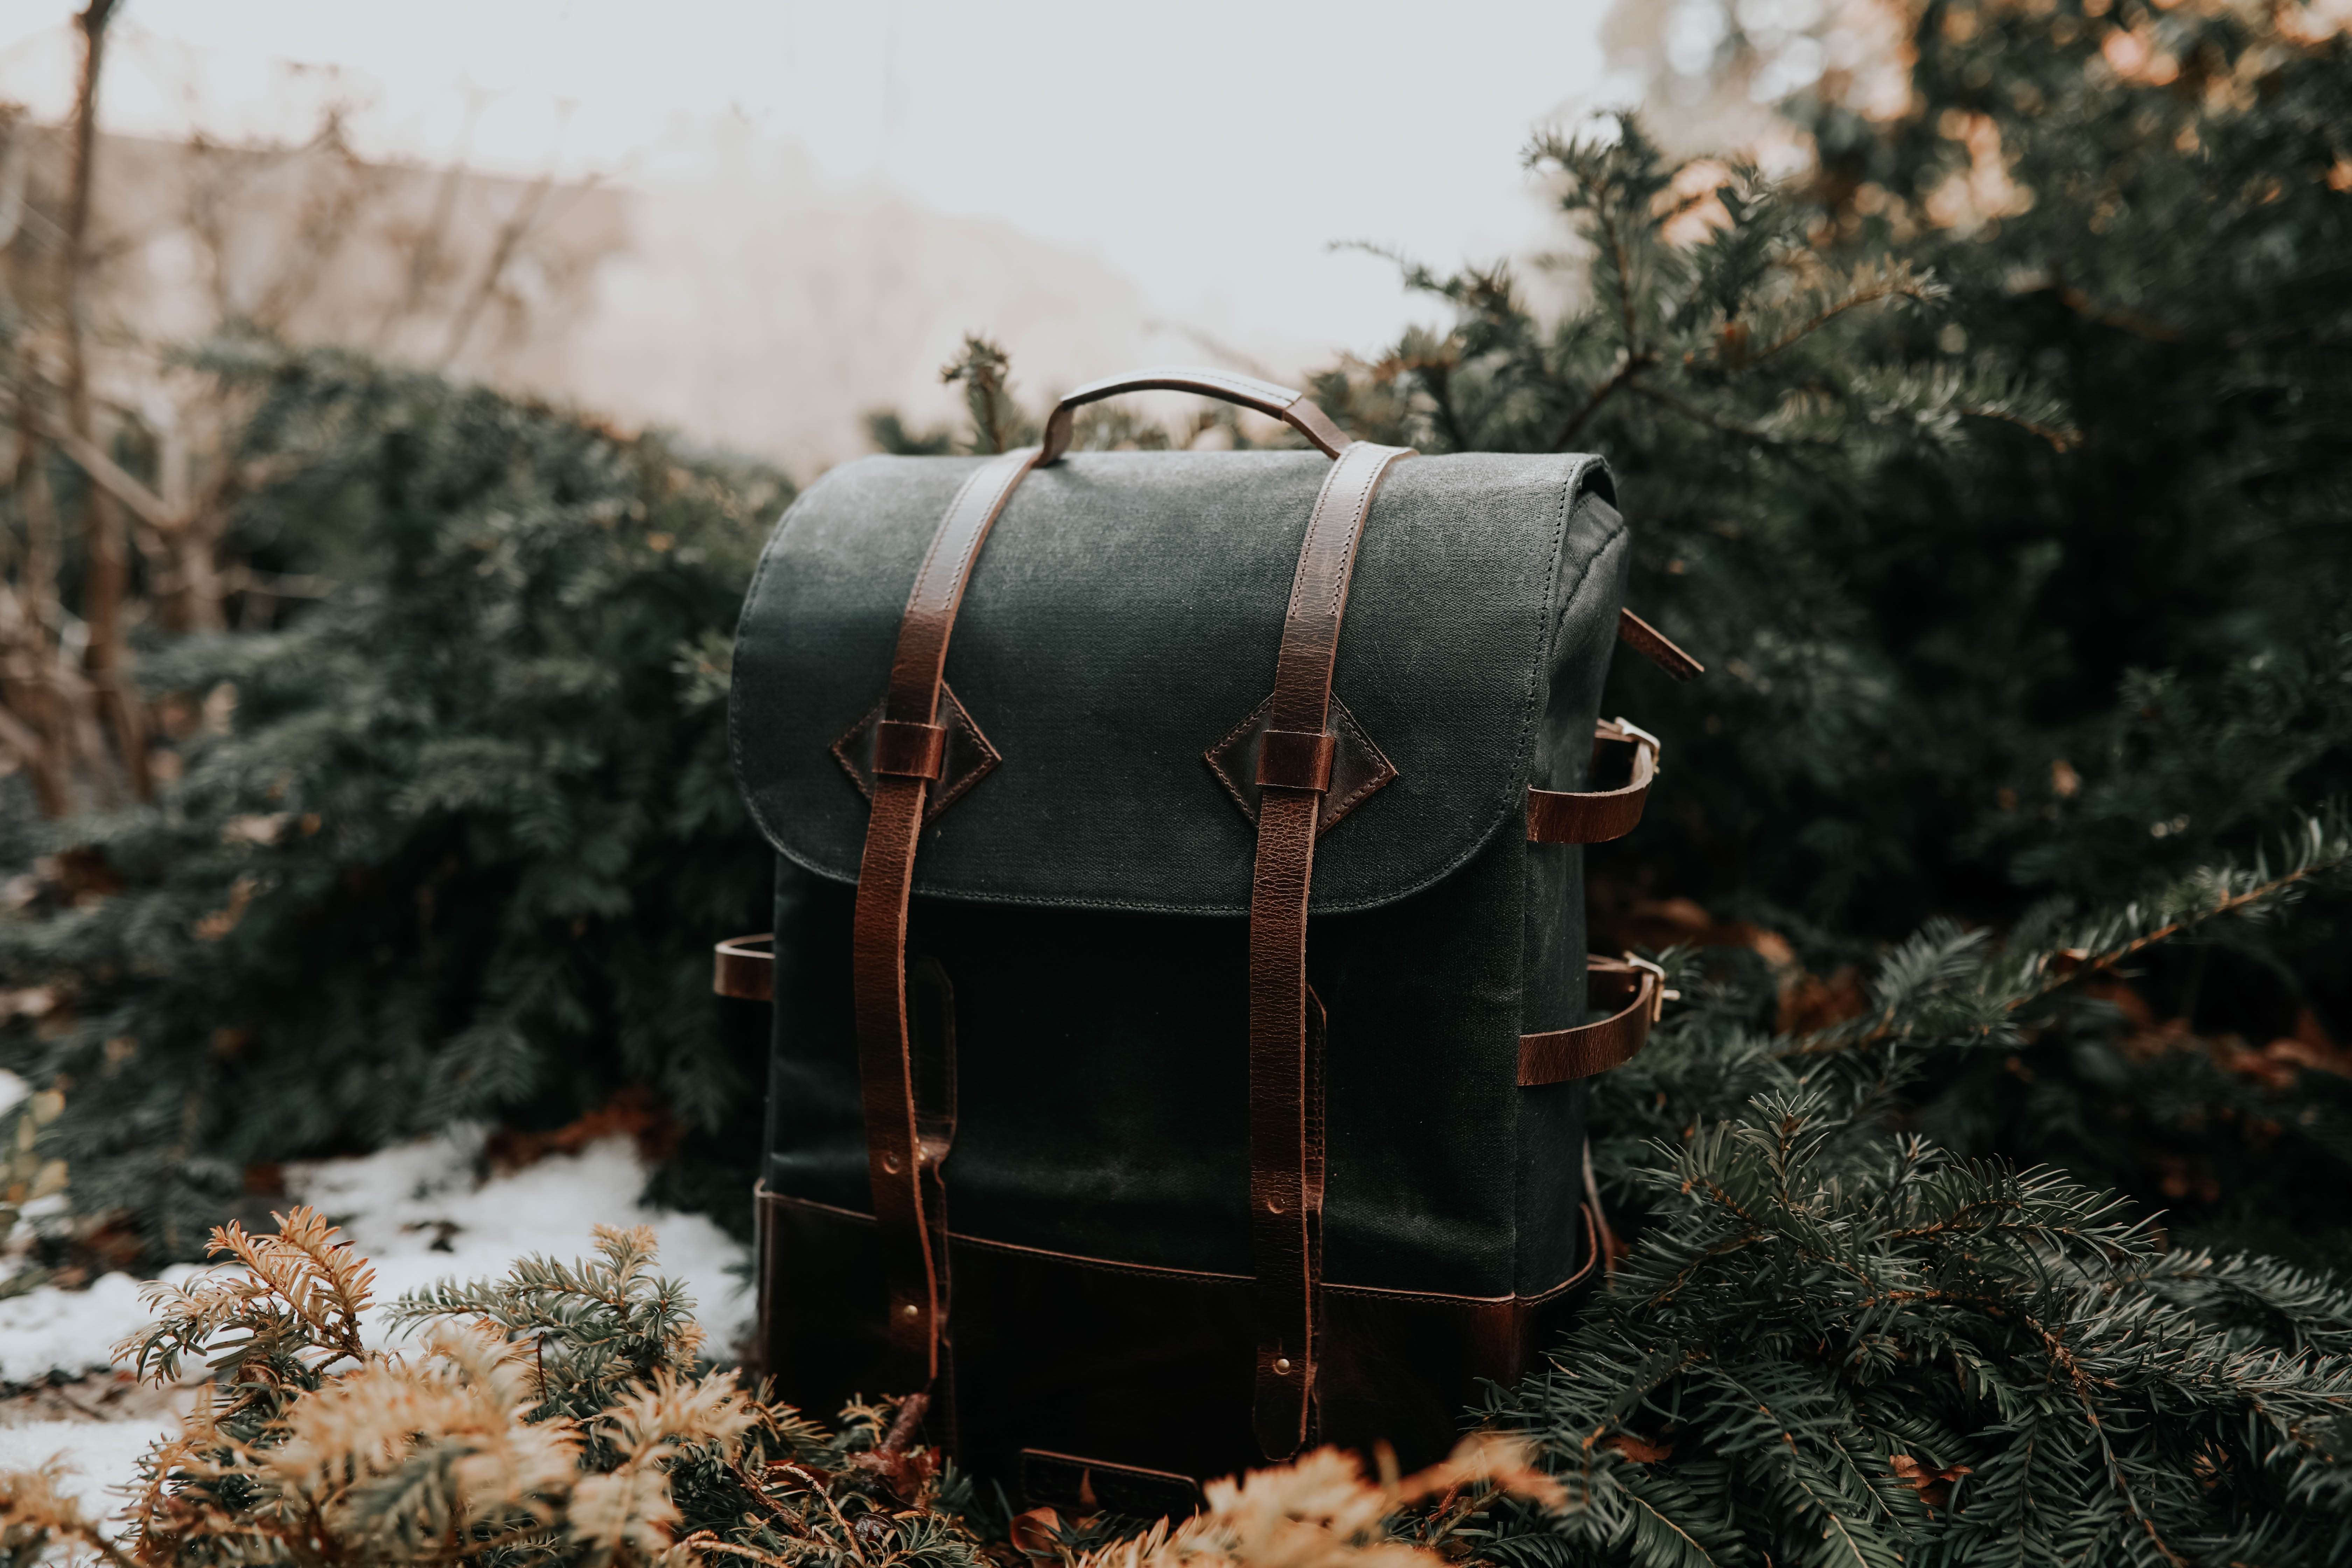 black, miscellanea, miscellaneous, spruce, fir, needles, backpack, rucksack, leather